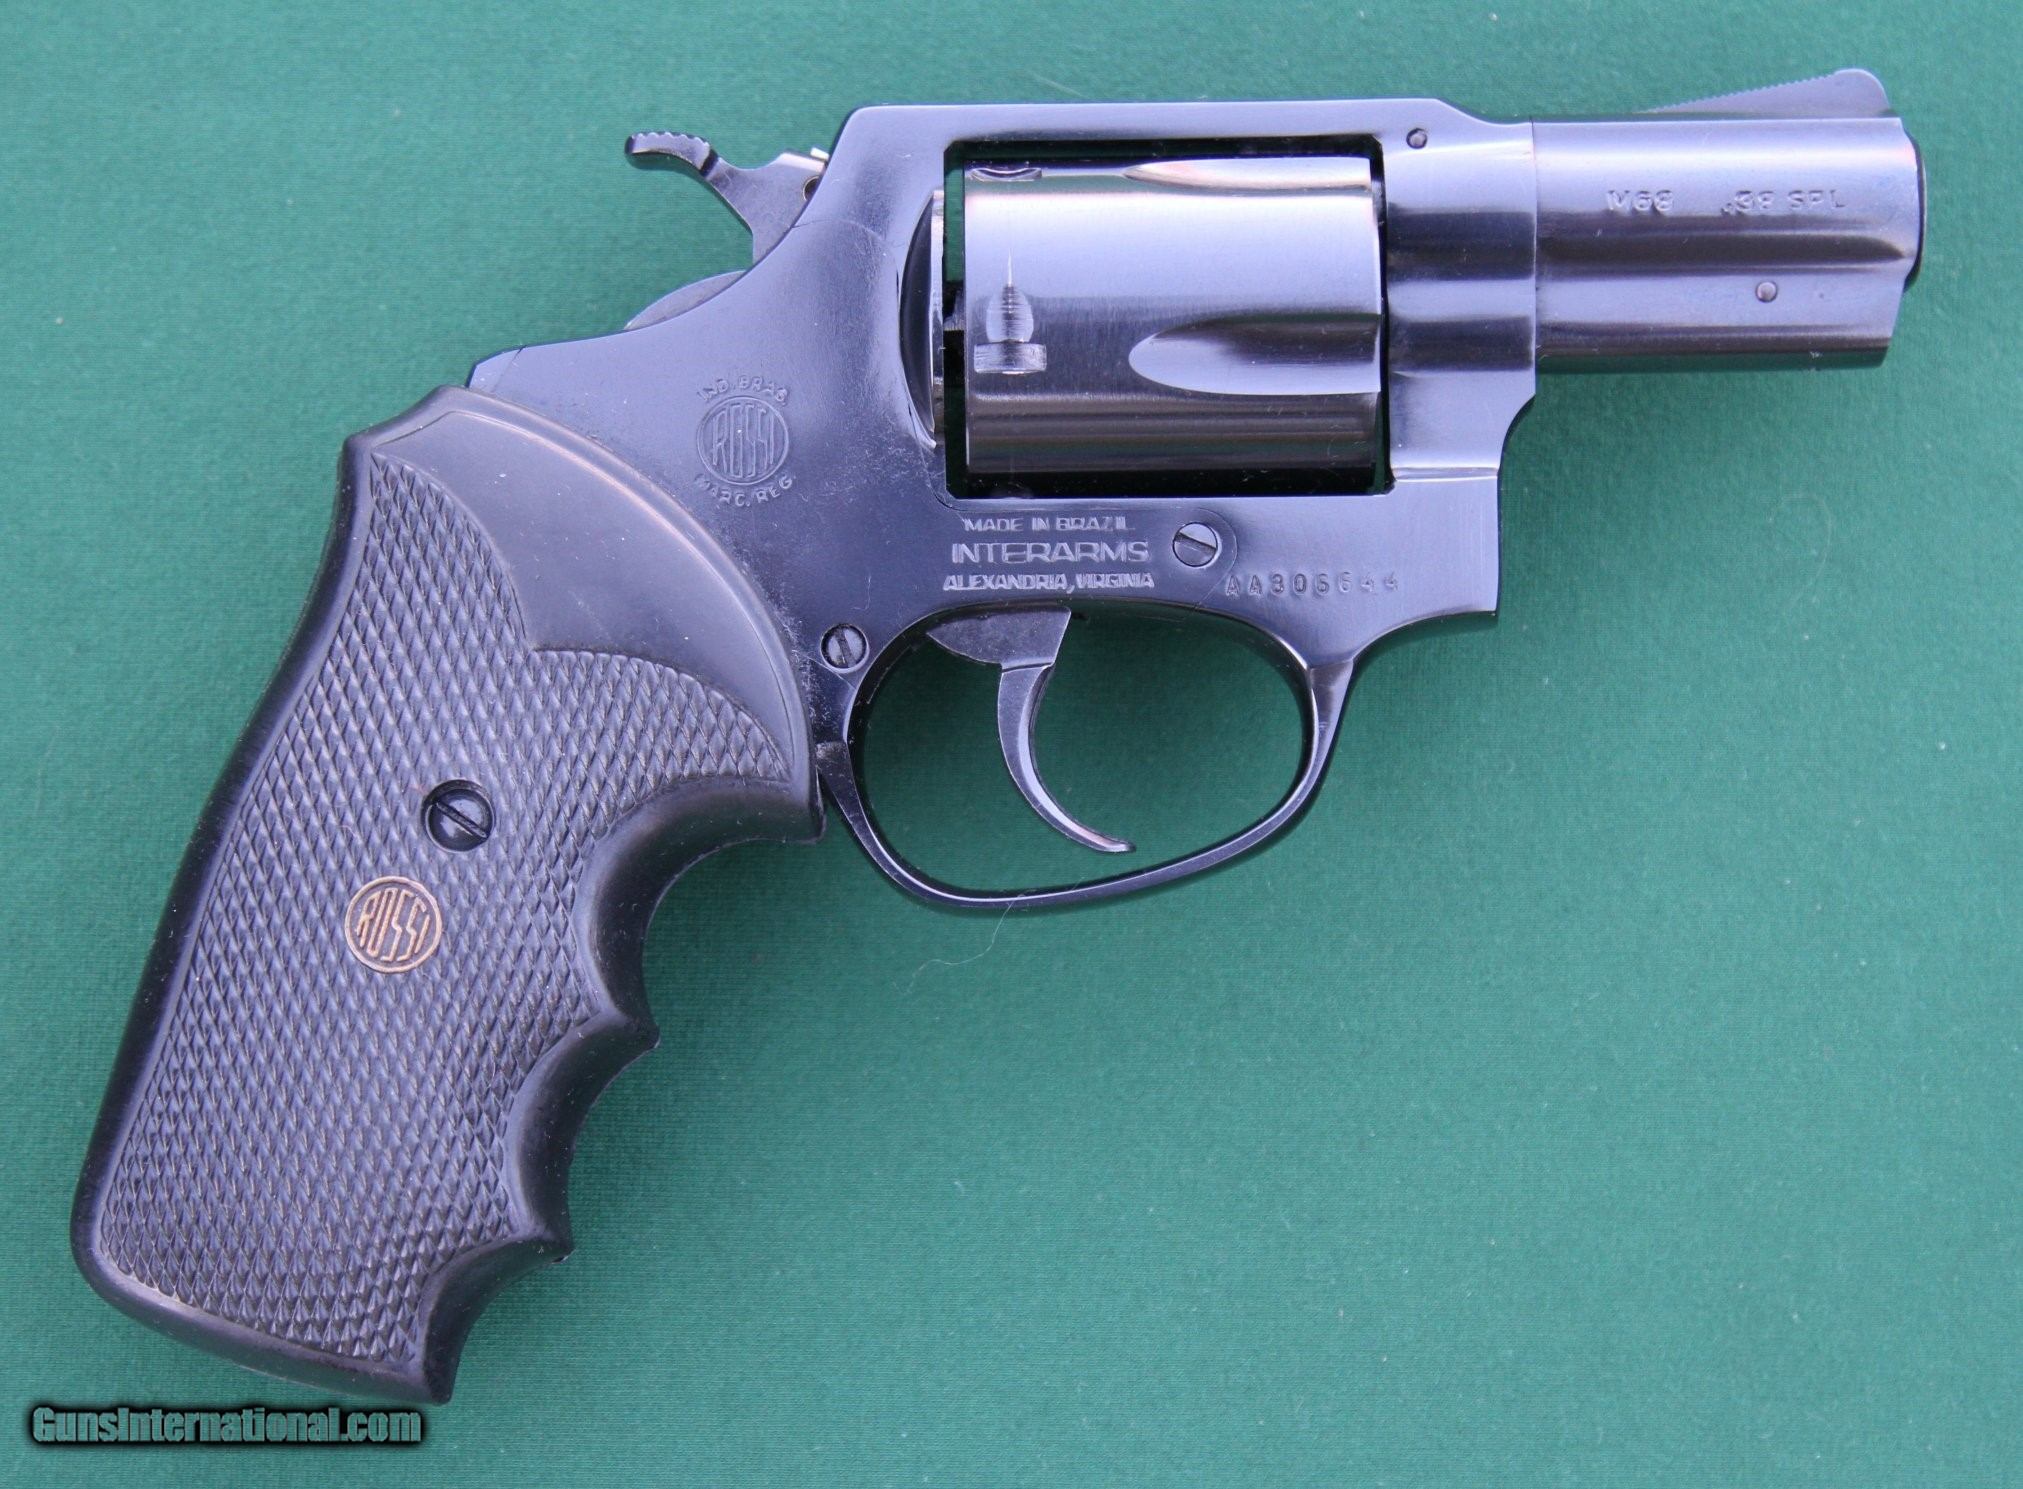 Amadeo Rossi .38 Special Double Action Revolver sold at auction on